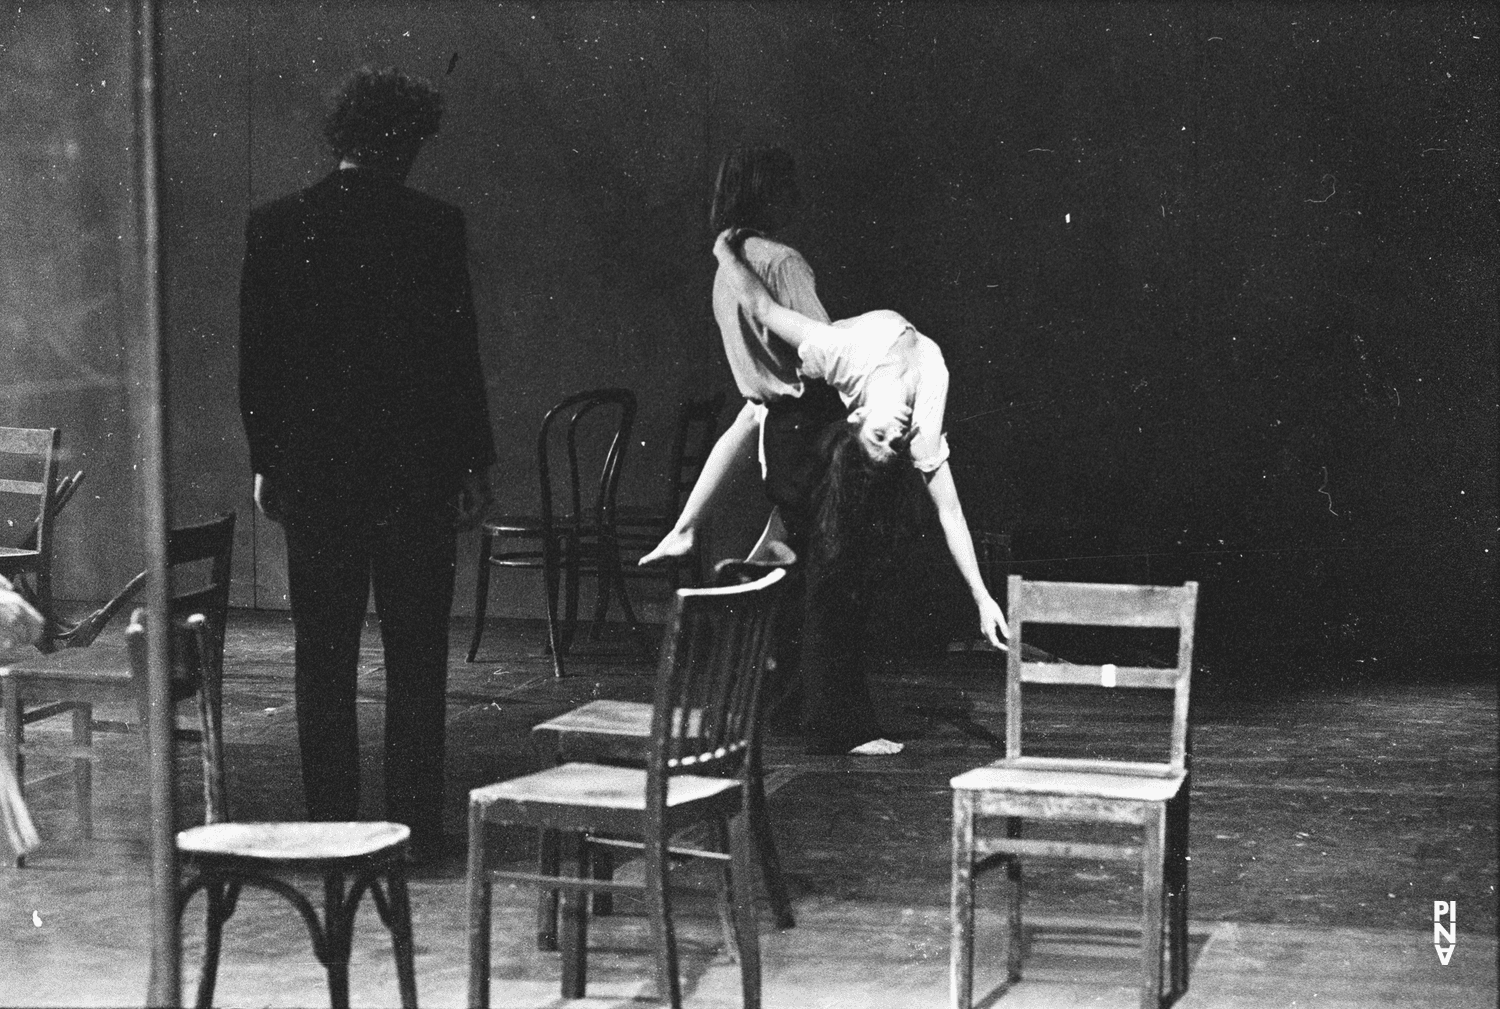 Rolf Borzik, Dominique Mercy and Malou Airaudo in “Café Müller” by Pina Bausch